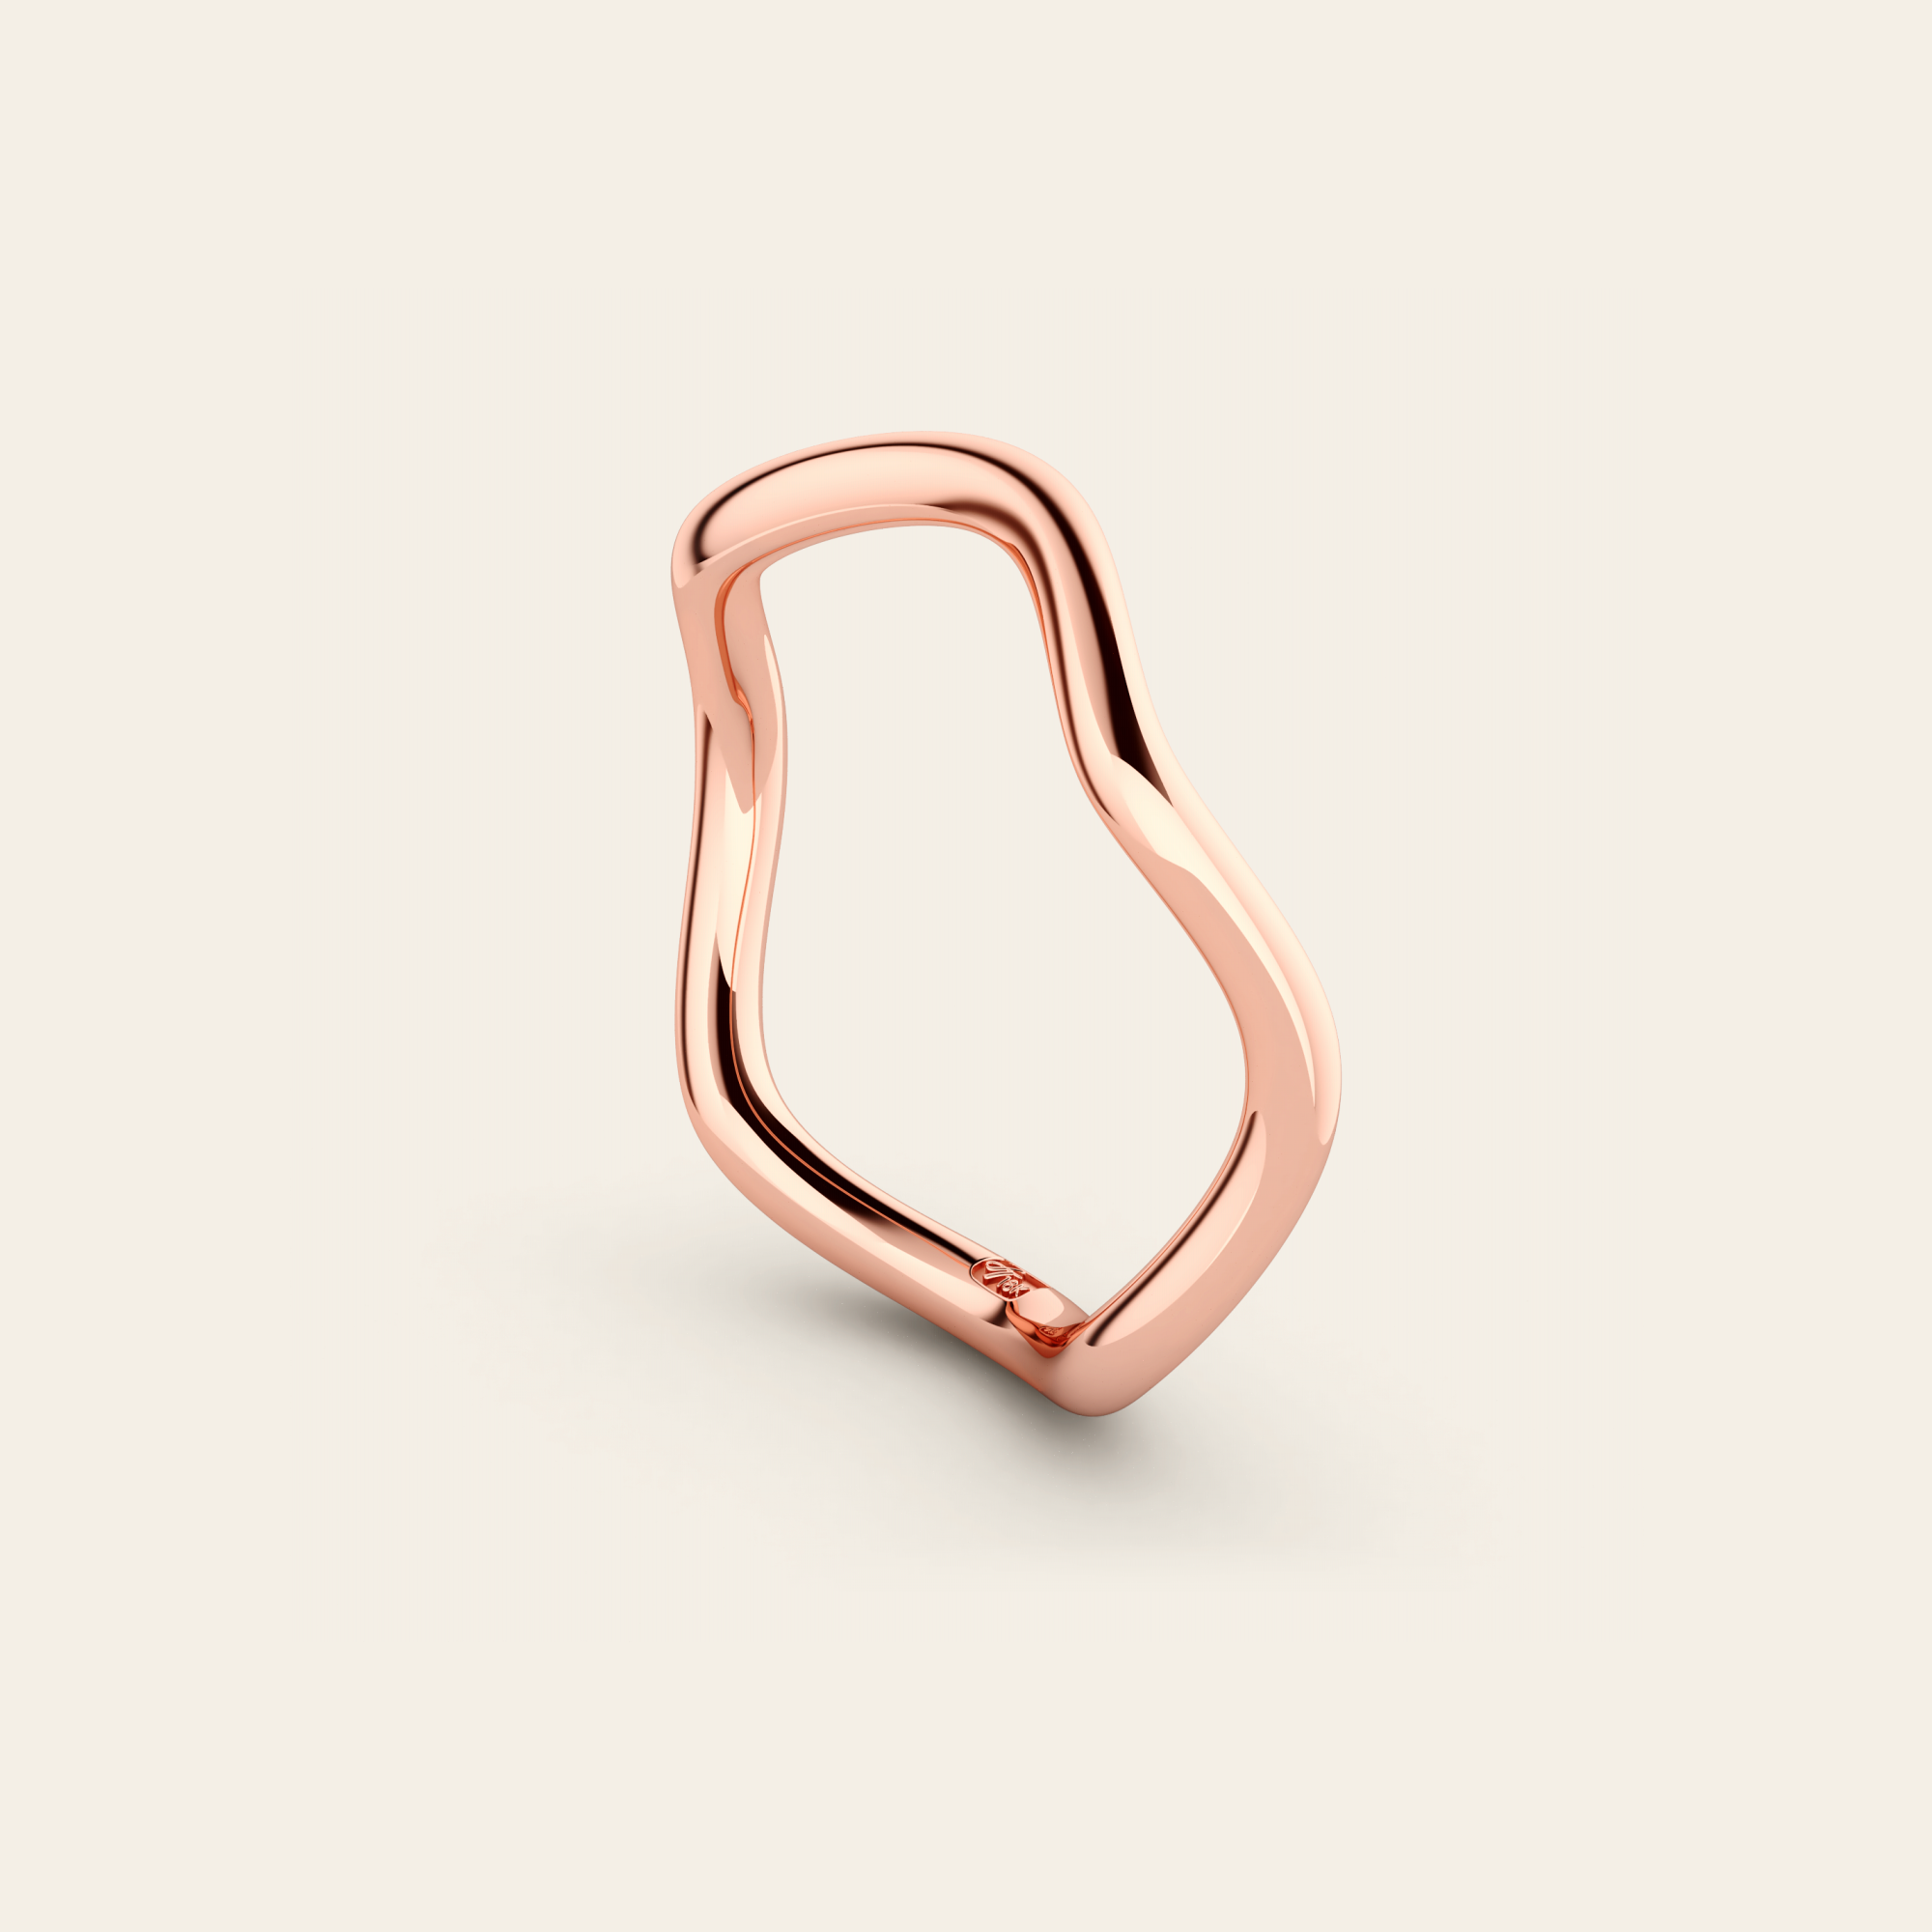 The Curve Ring in High Polished 18k Rose Gold